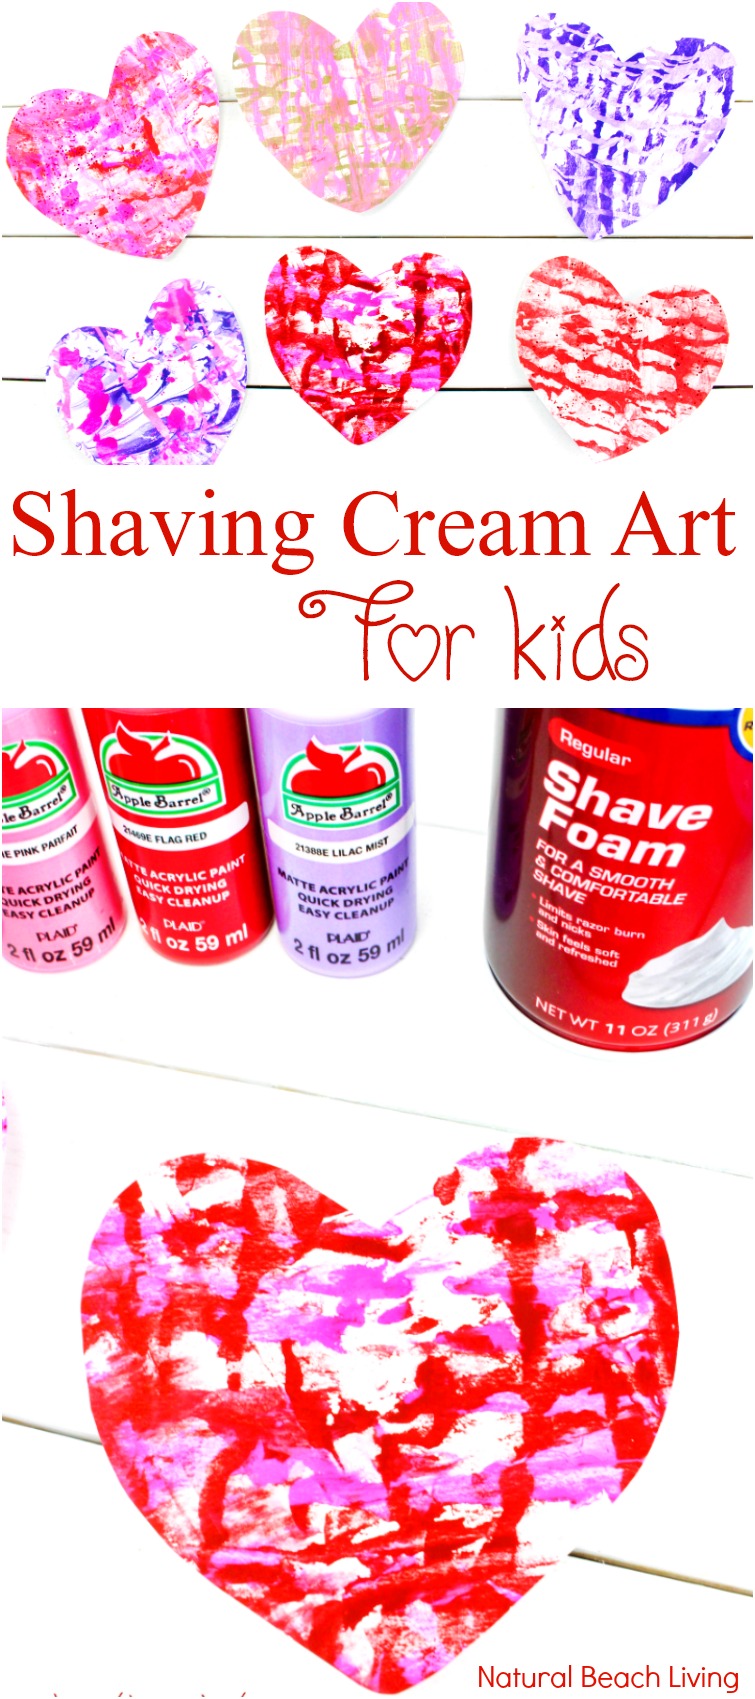 25 Valentine's Day Crafts for Kids, Kids Valentines Ideas and Activities, Kids love to do arts and crafts for Valentines day, Whether you are looking for heart crafts, love bugs, preschool handprint crafts, shaving cream art or something else, you are sure to find several Valentine ideas your children will enjoy. Valentine Crafts for Preschoolers 